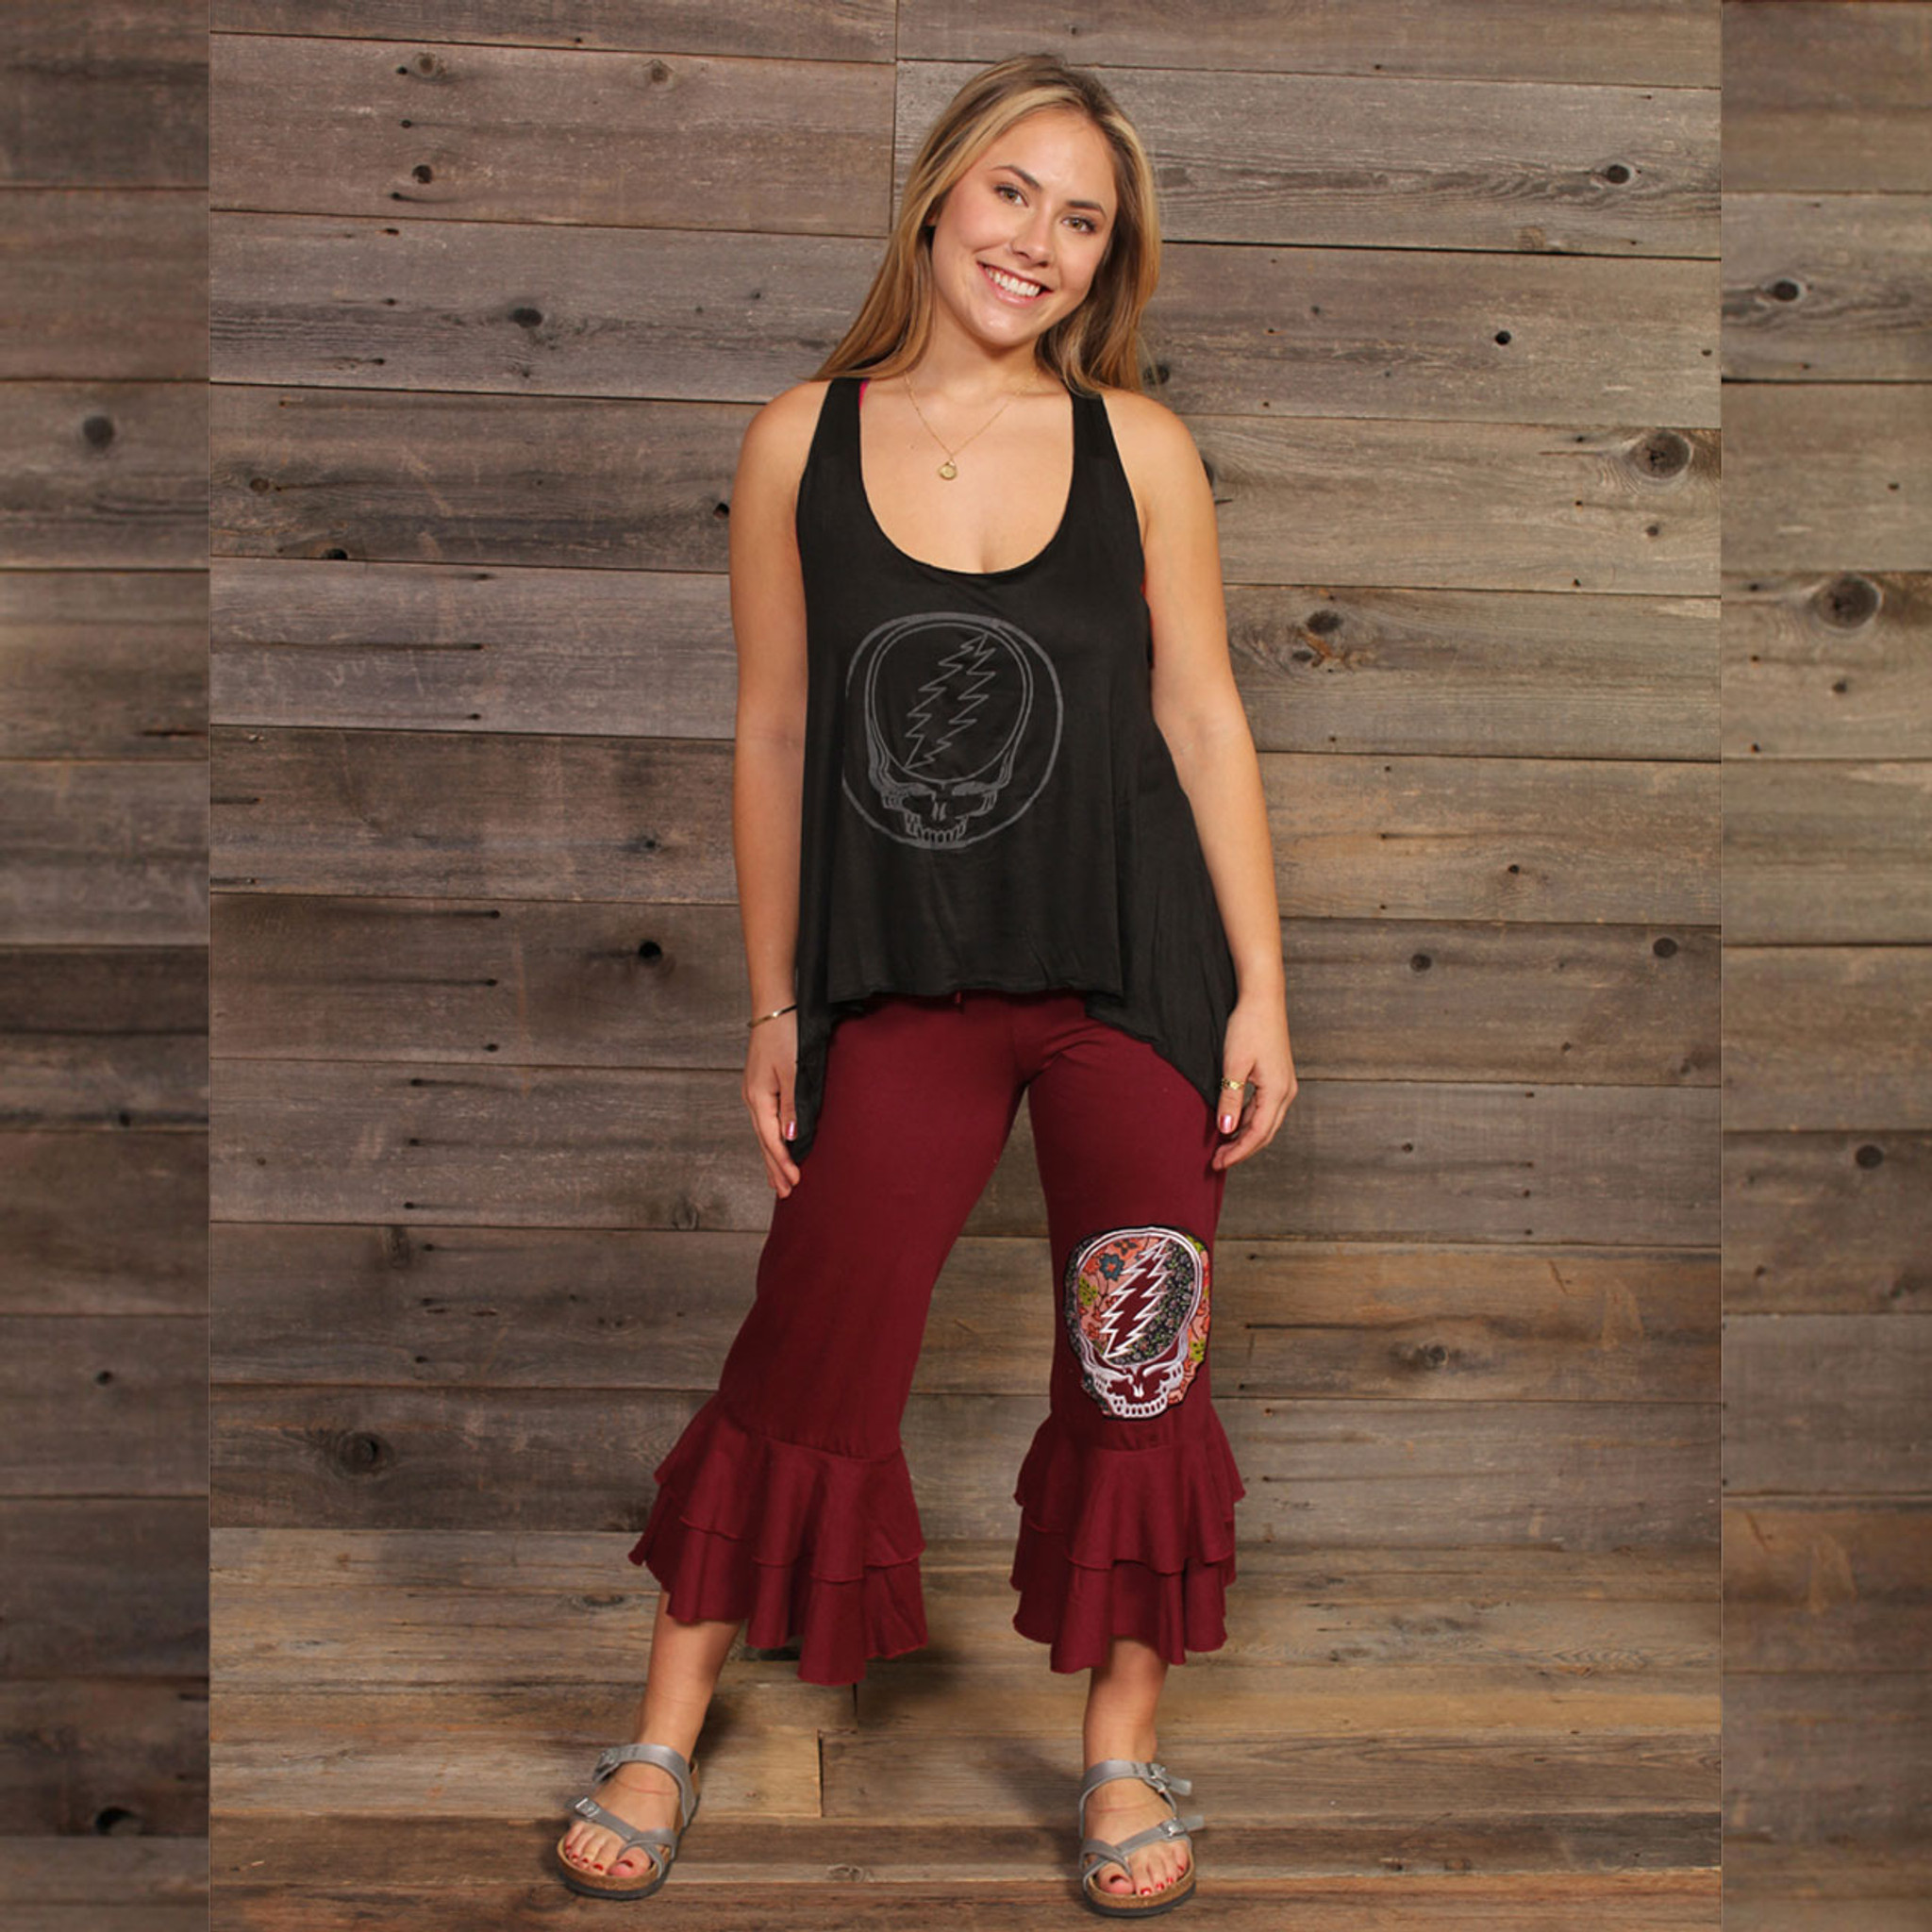 STEAL YOUR FACE CAPRI’S Cotton Ruffle Capri with Grateful Dead Embroidery On One Leg